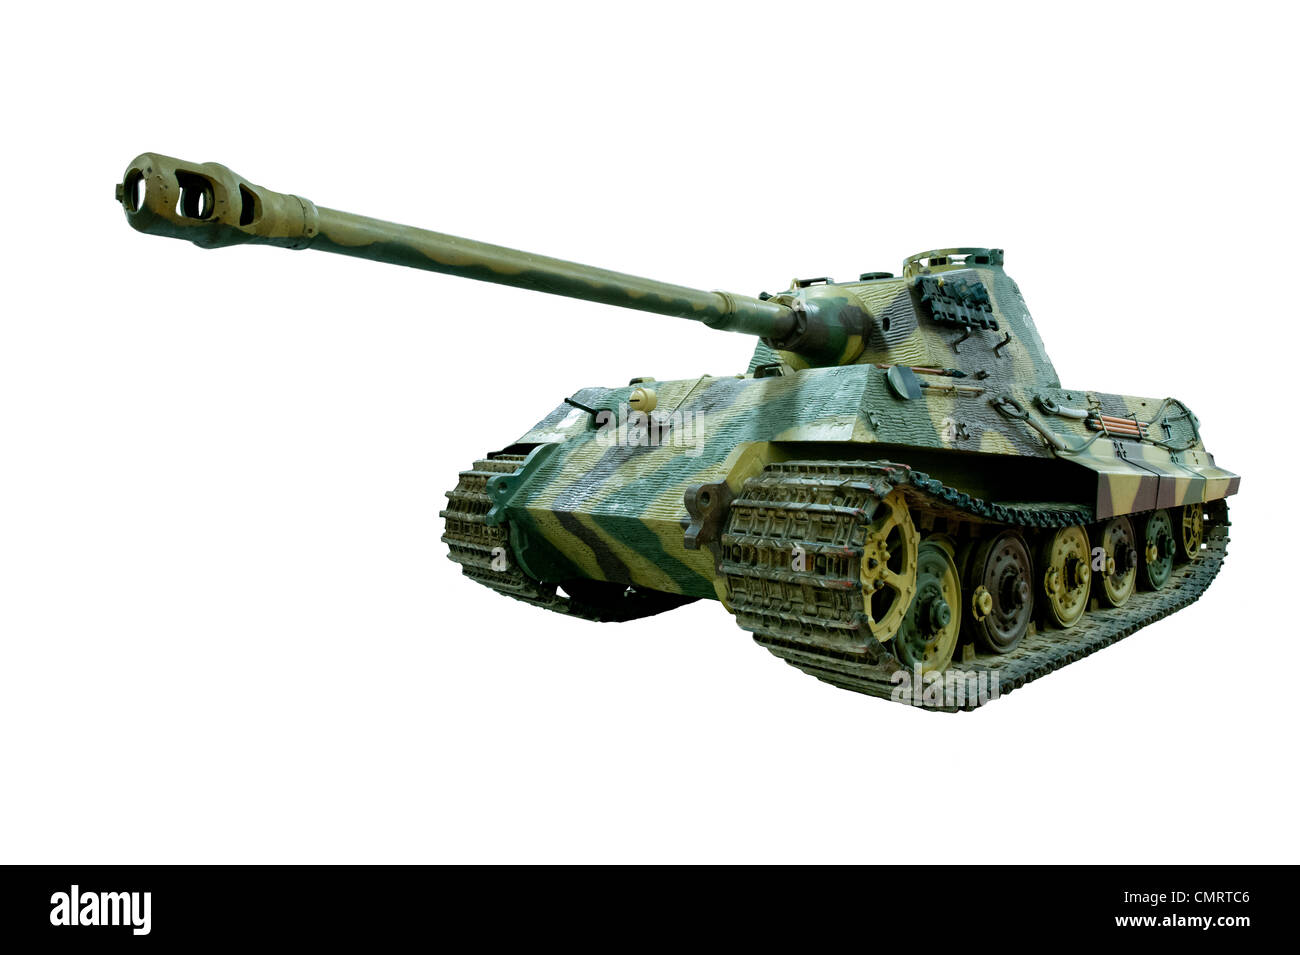 A cut out of a  Pz Kpfw VI Ausf B Tiger II heavy Tank used by Nazi German forces during WW2 Stock Photo